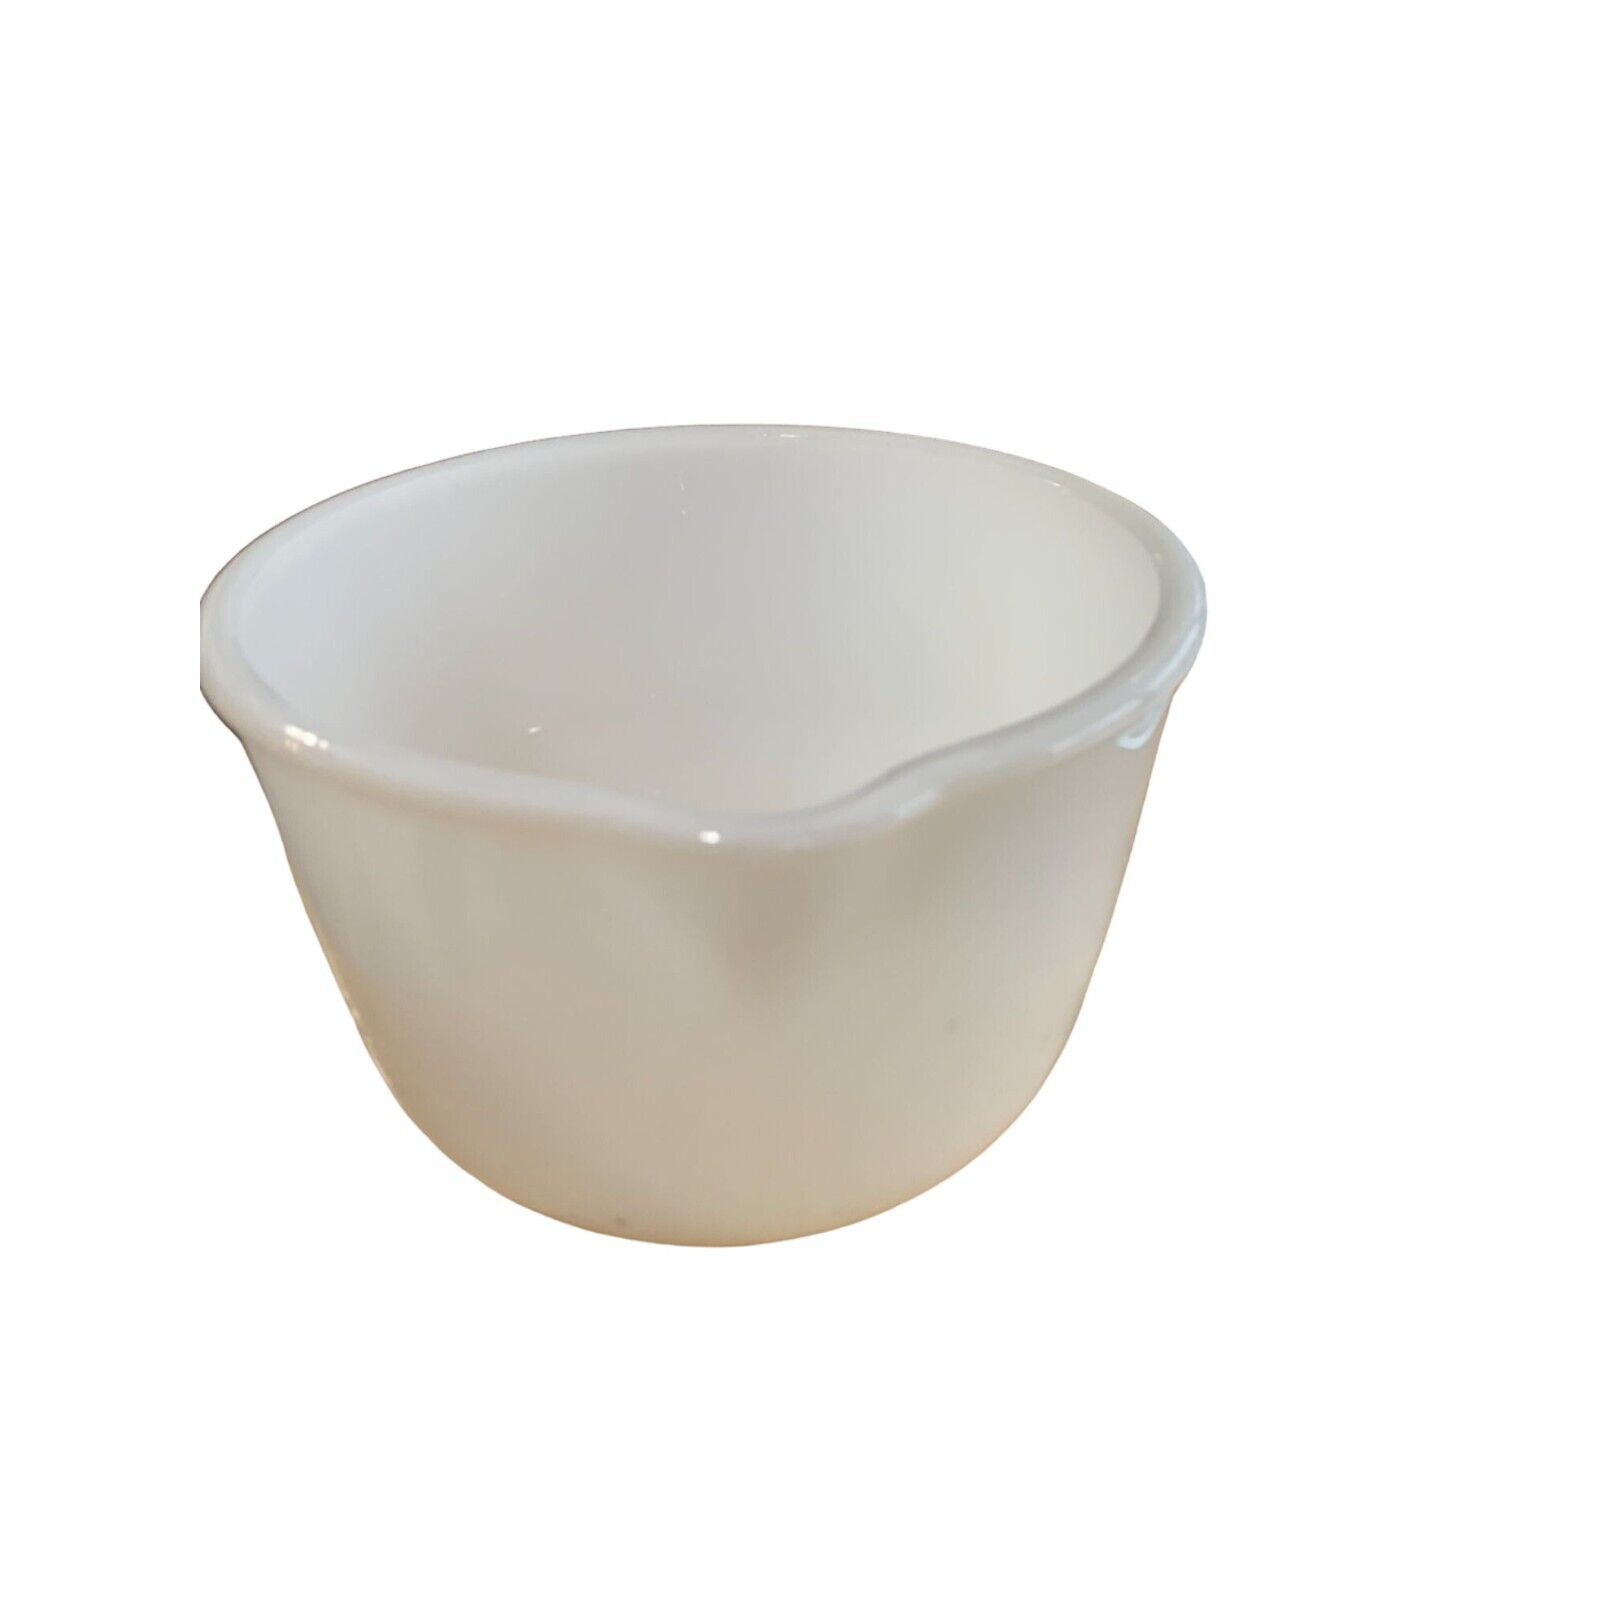 Primary image for Fire King Ware Sunbeam white Milk Glass Mixing Bowl Pour Spout 6.5 in Diam 4 in